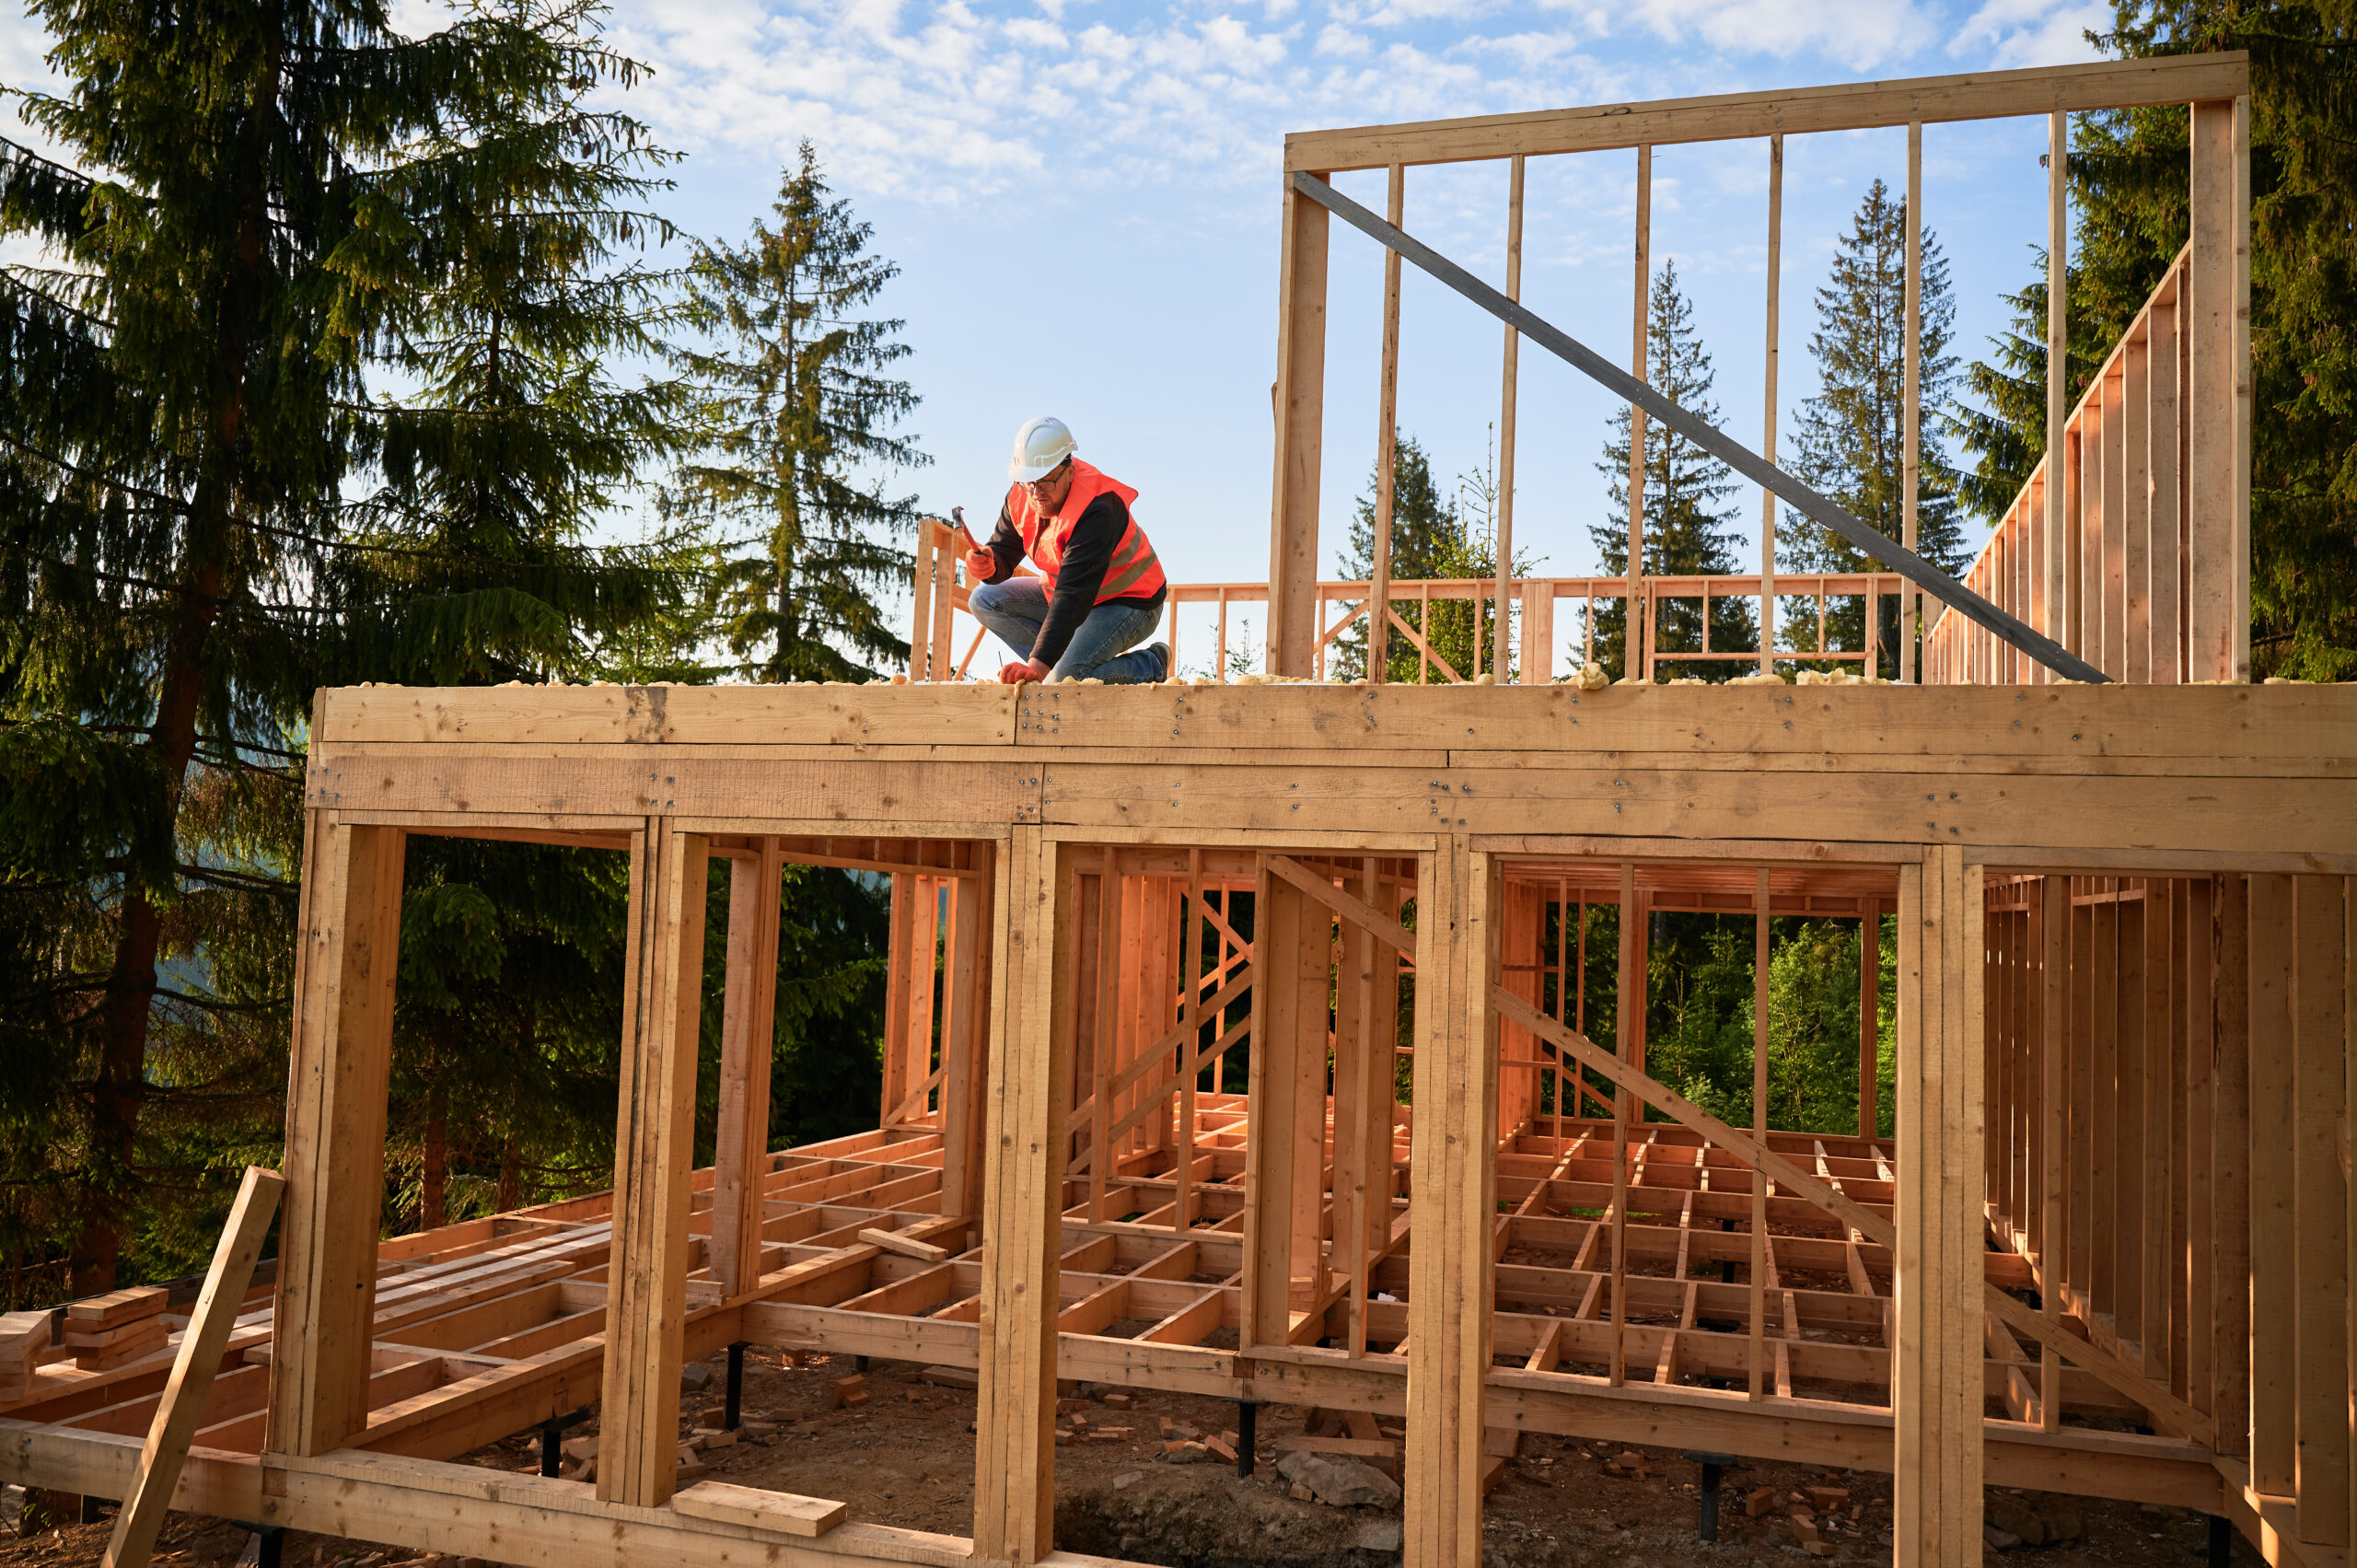 Carpenter constructing two-story wooden frame house near forest. Bearded man hammering nails into the structure, wearing protective helmet, construction vest. Concept of modern ecological construction